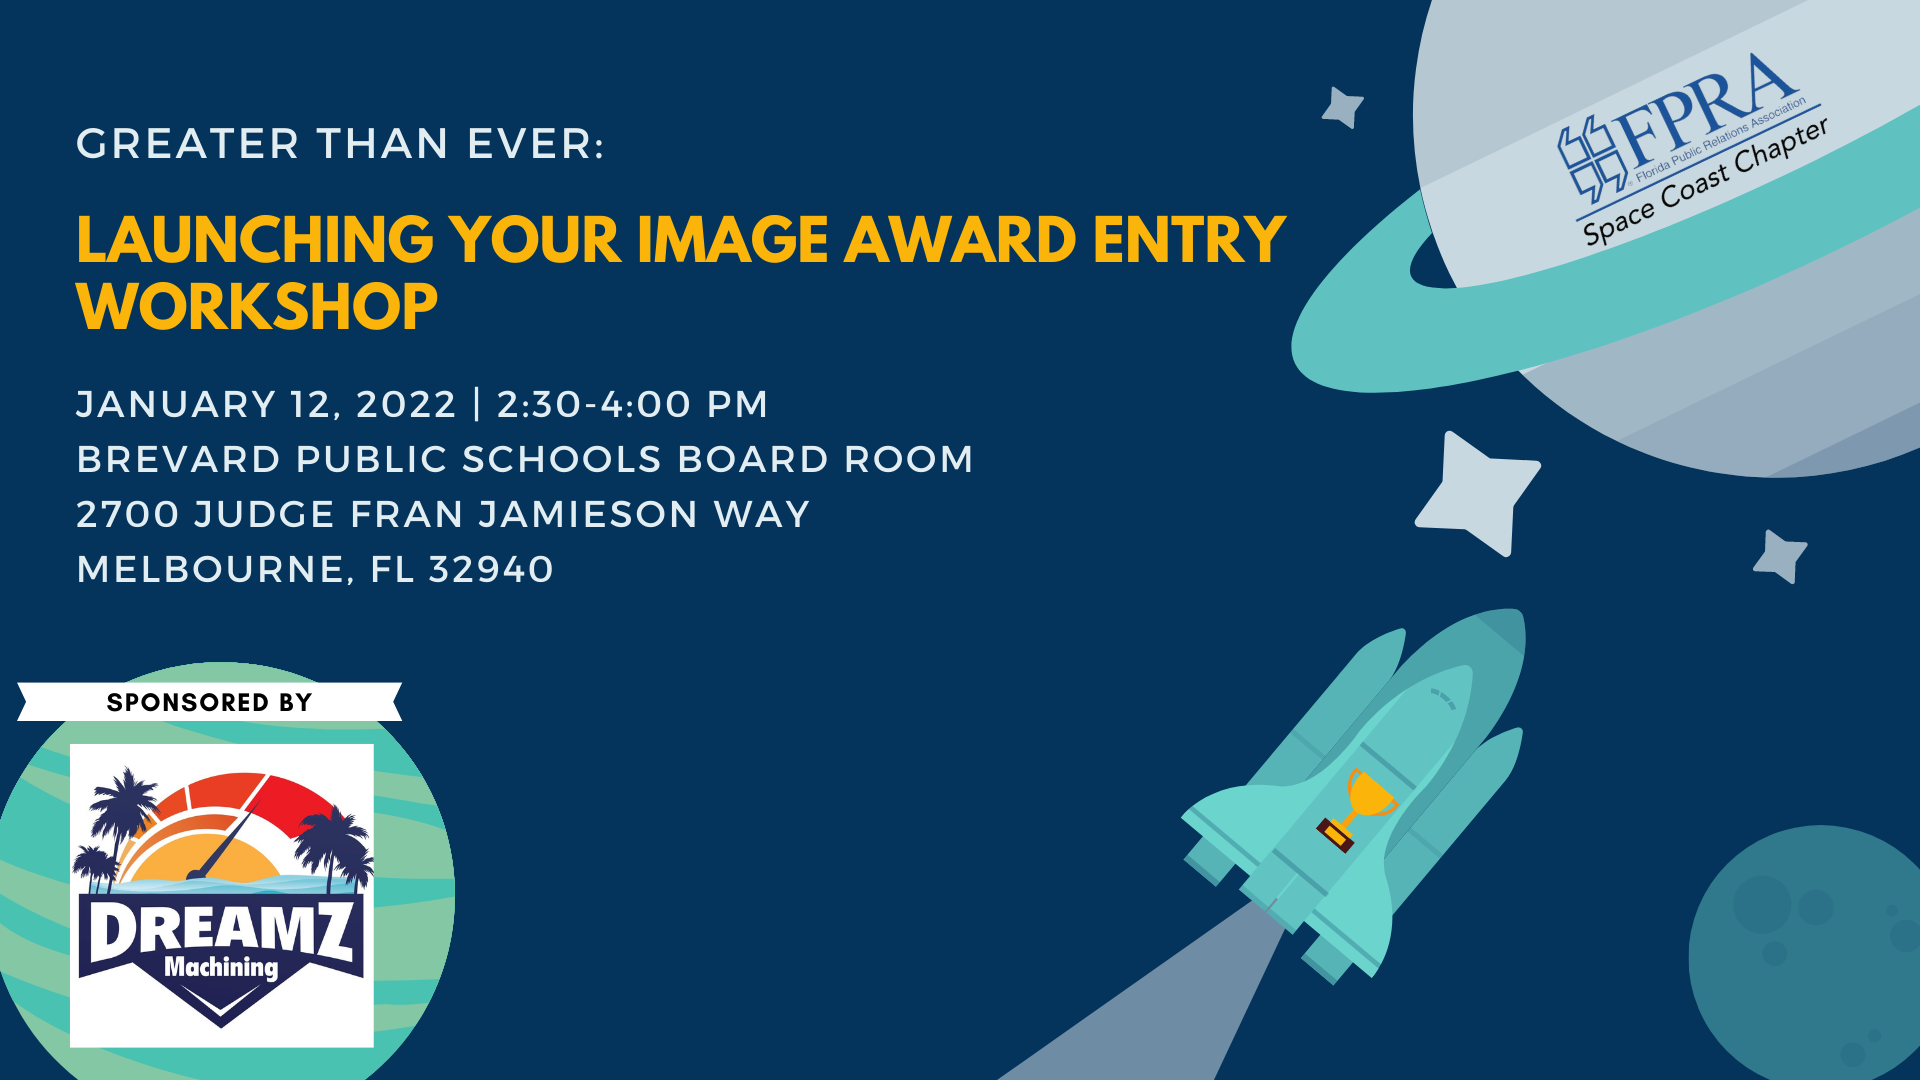 Greater Than Ever: Launching Your Image Award Entry Workshop